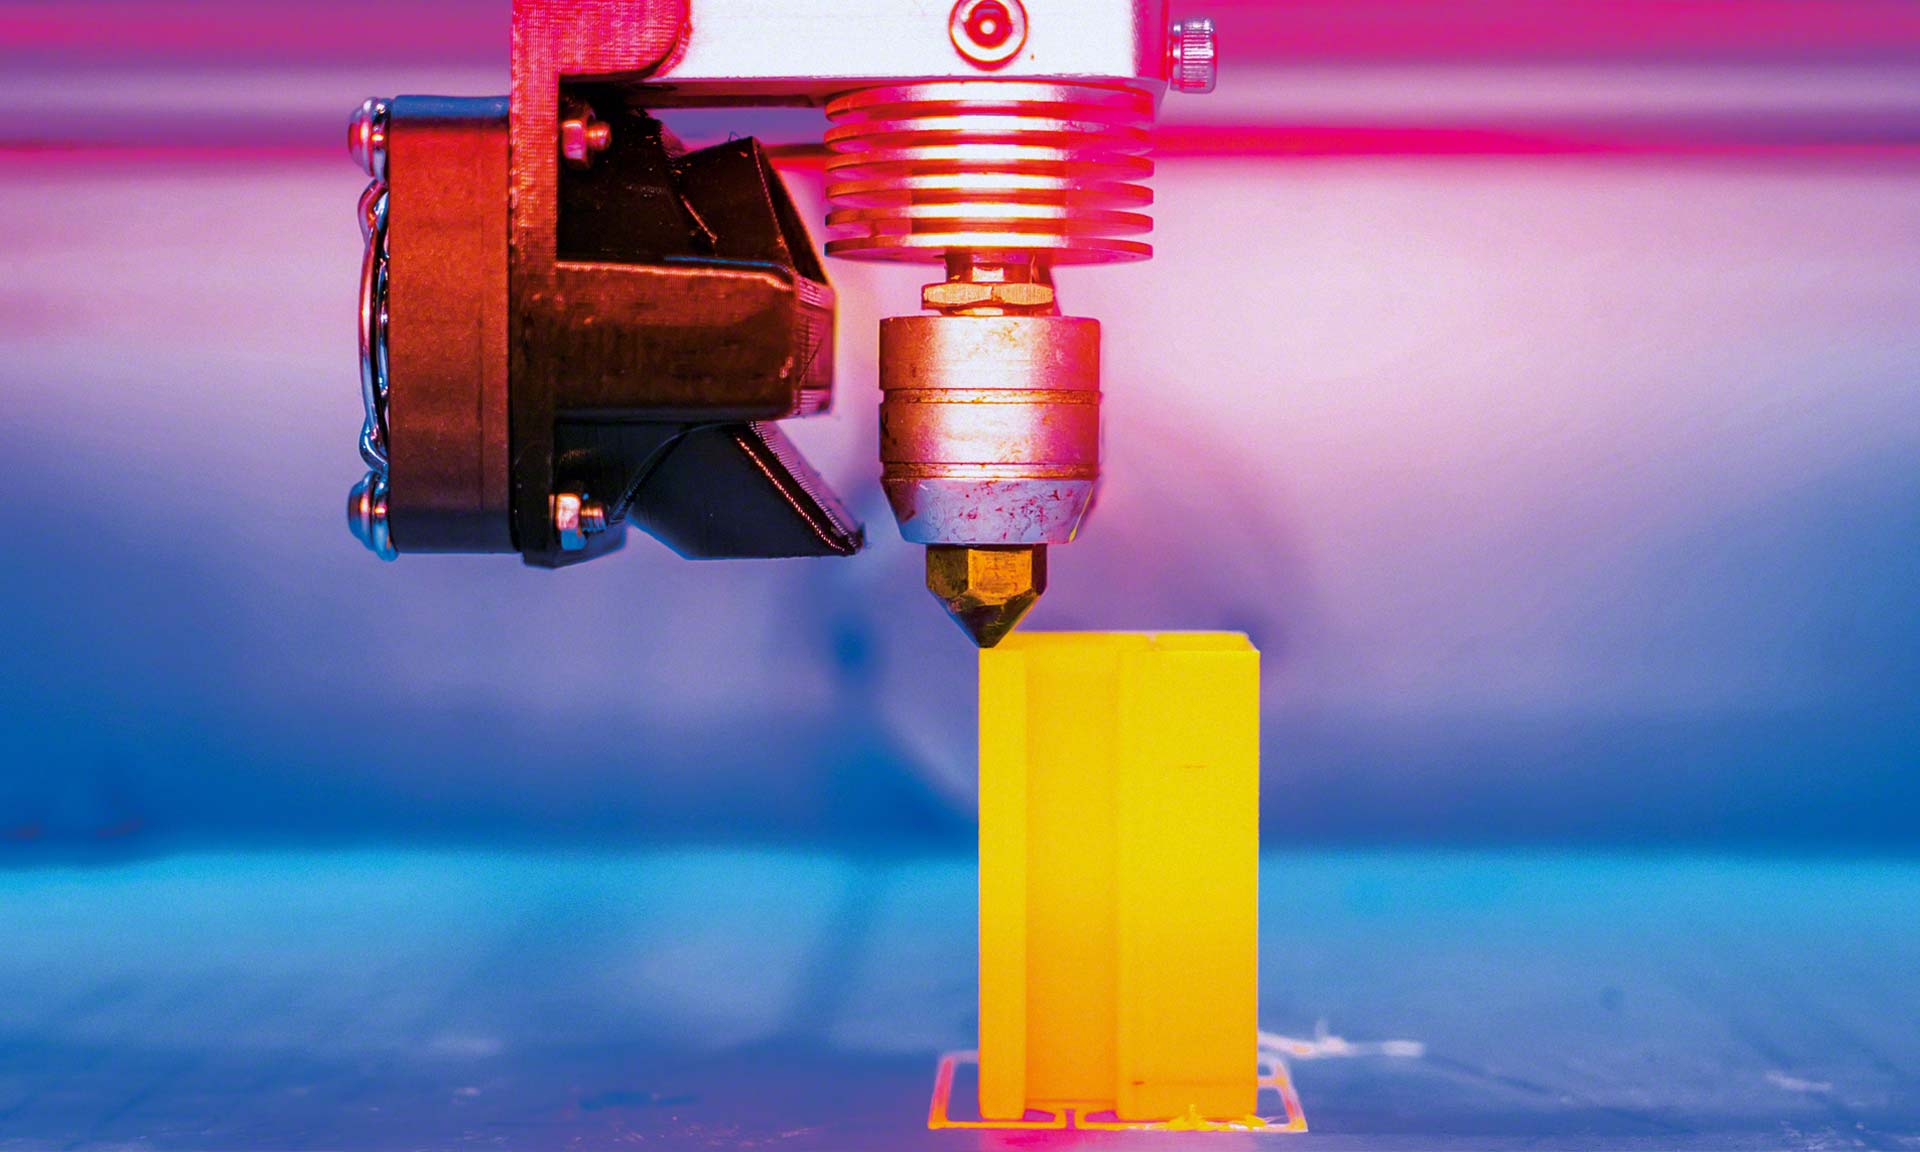 advancements-in-3d-printing-transforming-manufacturing-and-supply-chains-1 Advancements in 3D Printing: Transforming Manufacturing and Supply Chains